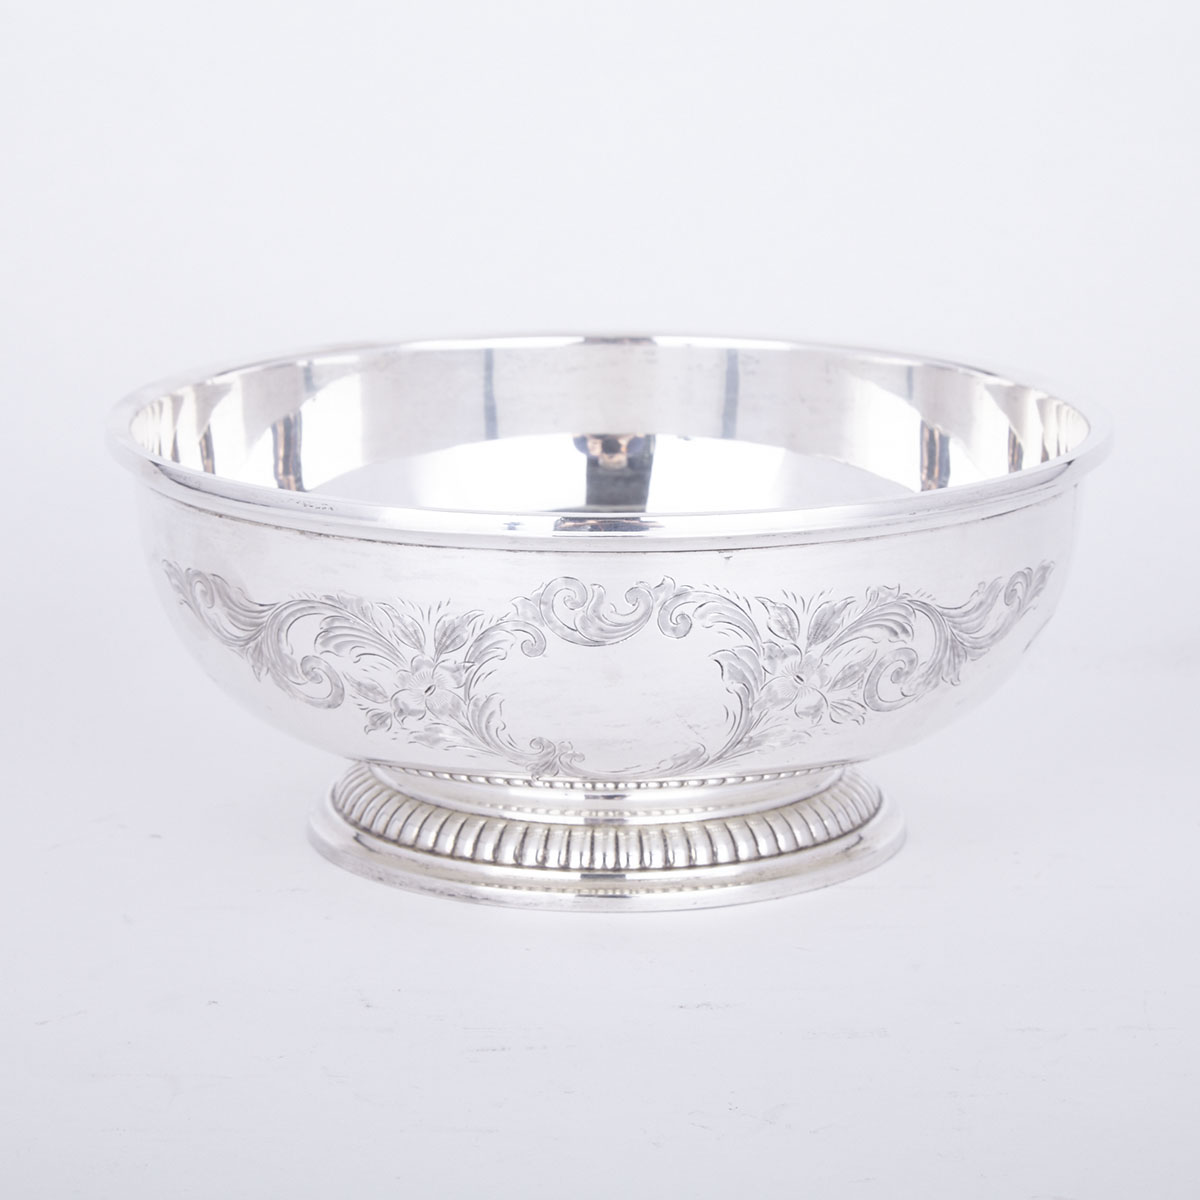 Canadian Silver Footed Bowl, Henry Birks & Sons, Montreal, Que., 1960